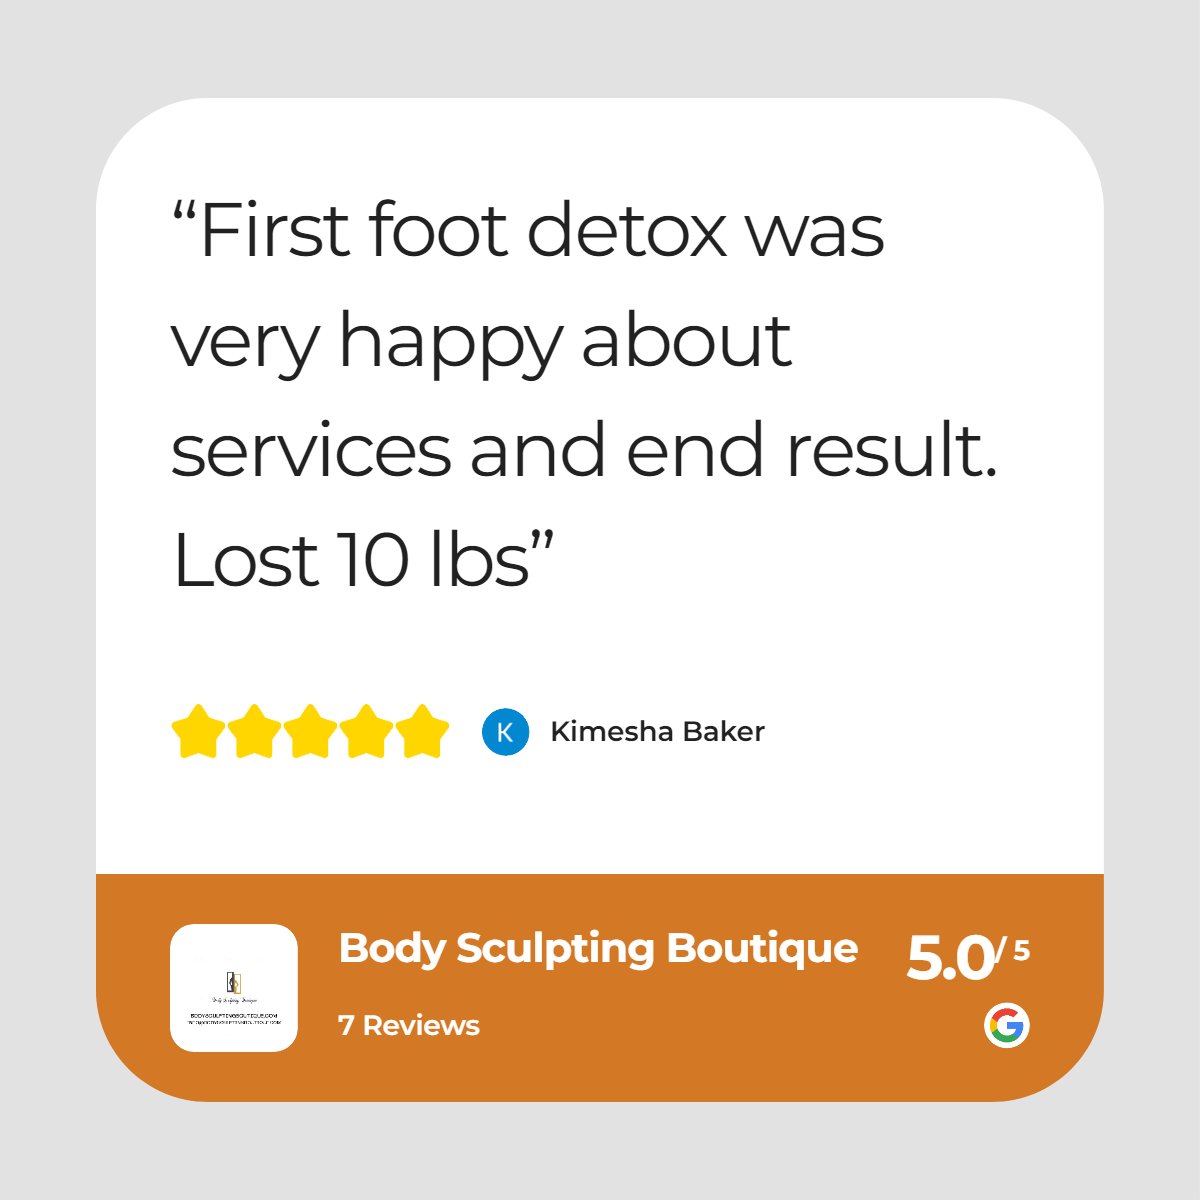 Thank you for the great review!  So happy you enjoyed the Foot Detox! #bodysculptingstudioinspringtx #bodysculptingspaspringtx #bodysculptingsalonspringtx #bodydetox #footDetox #bodyscuptingreview #springtxbodysculptingsalon